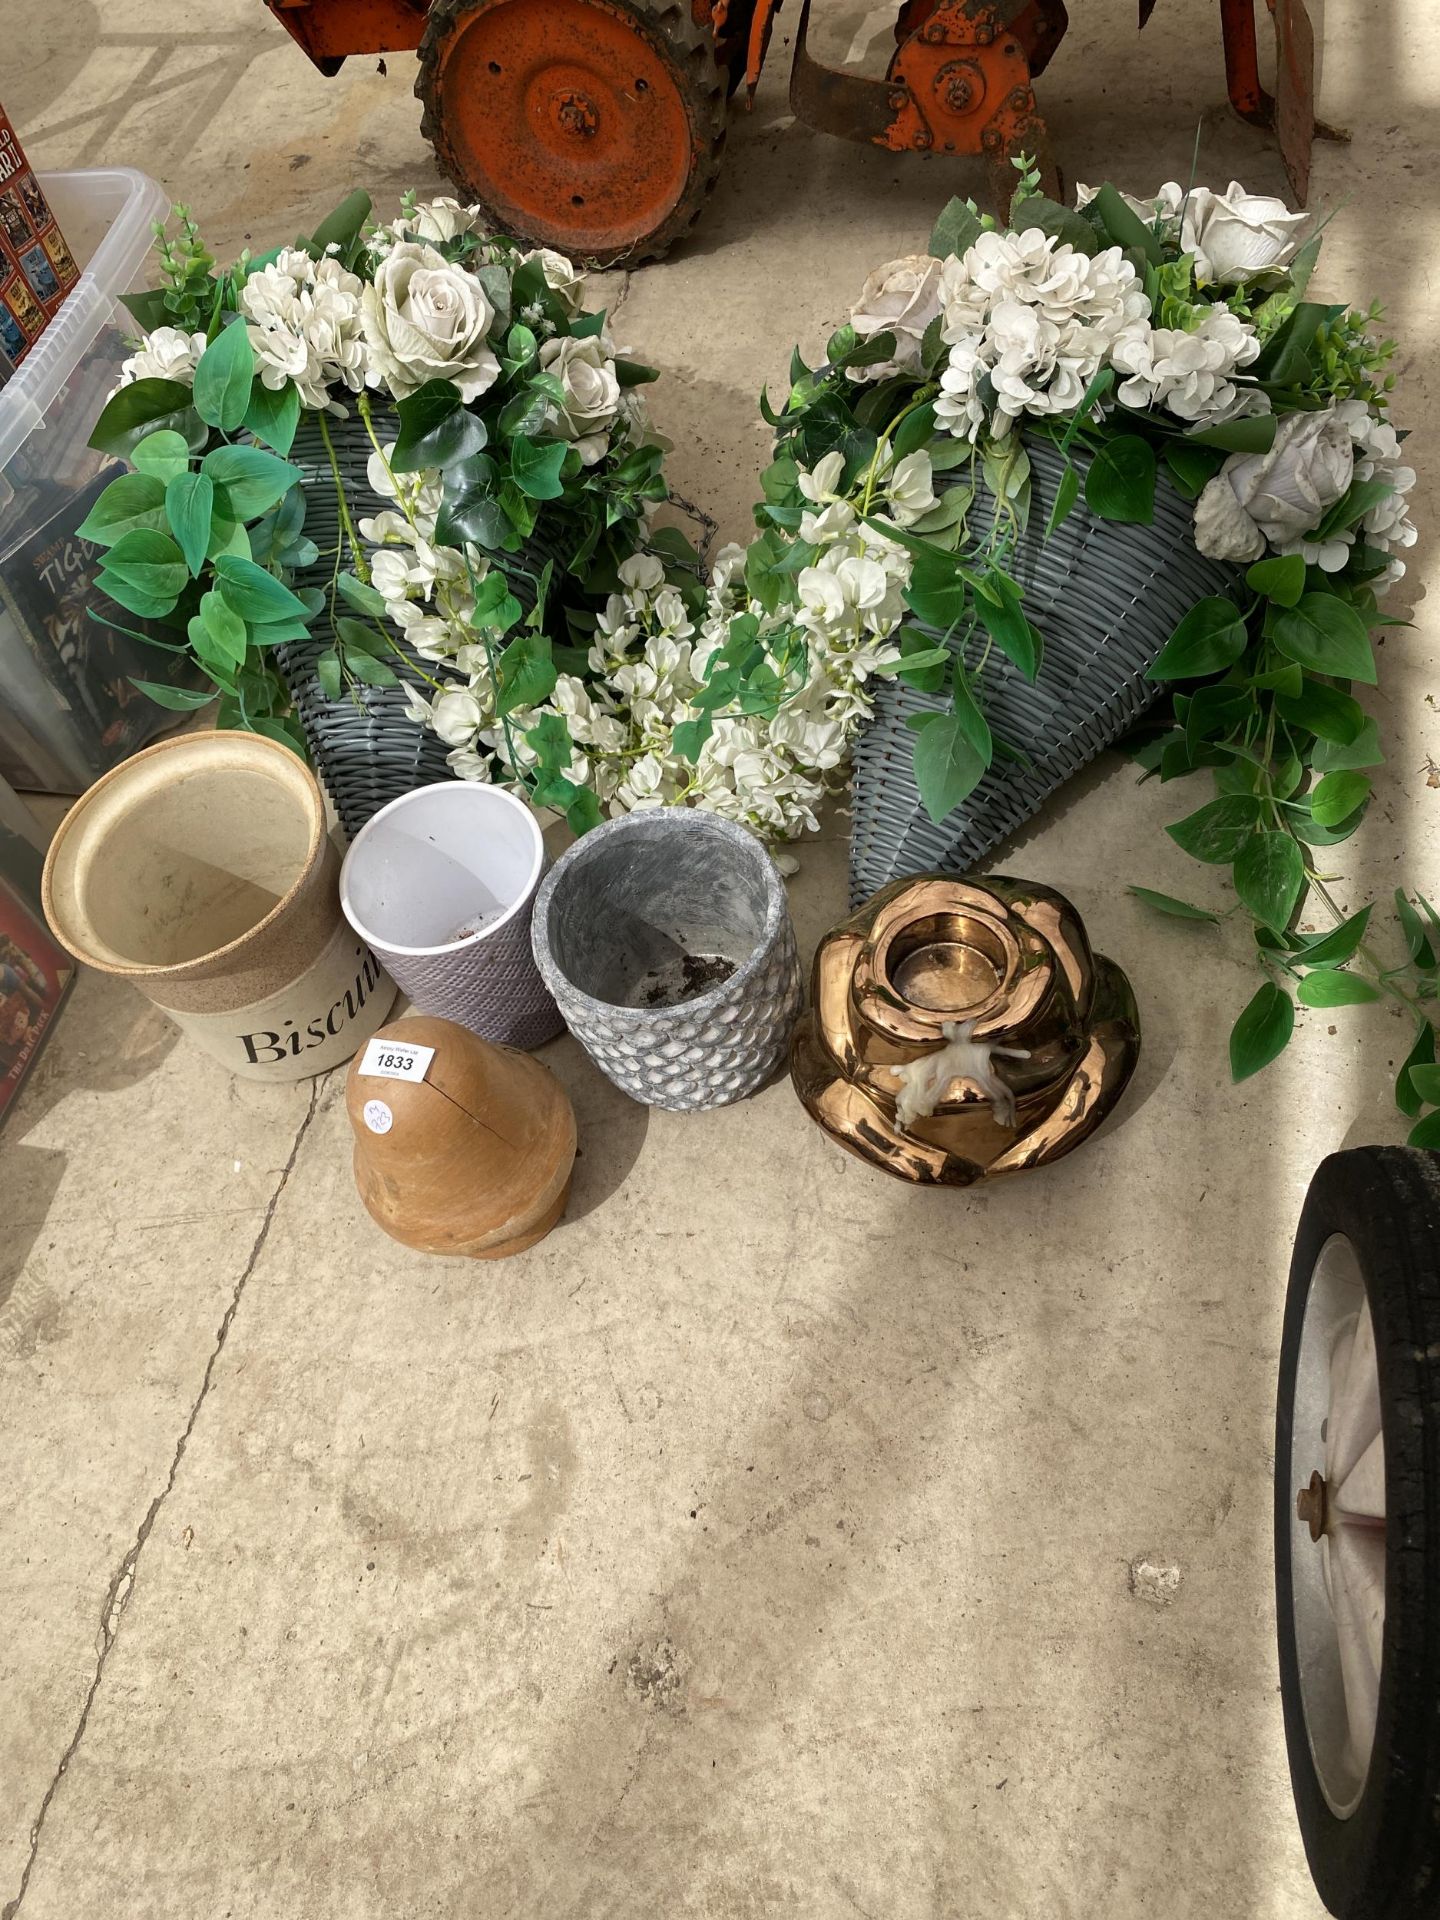 AN ASSORTMENT OF PLANTERS AND ARTIFICIAL FLOWERS